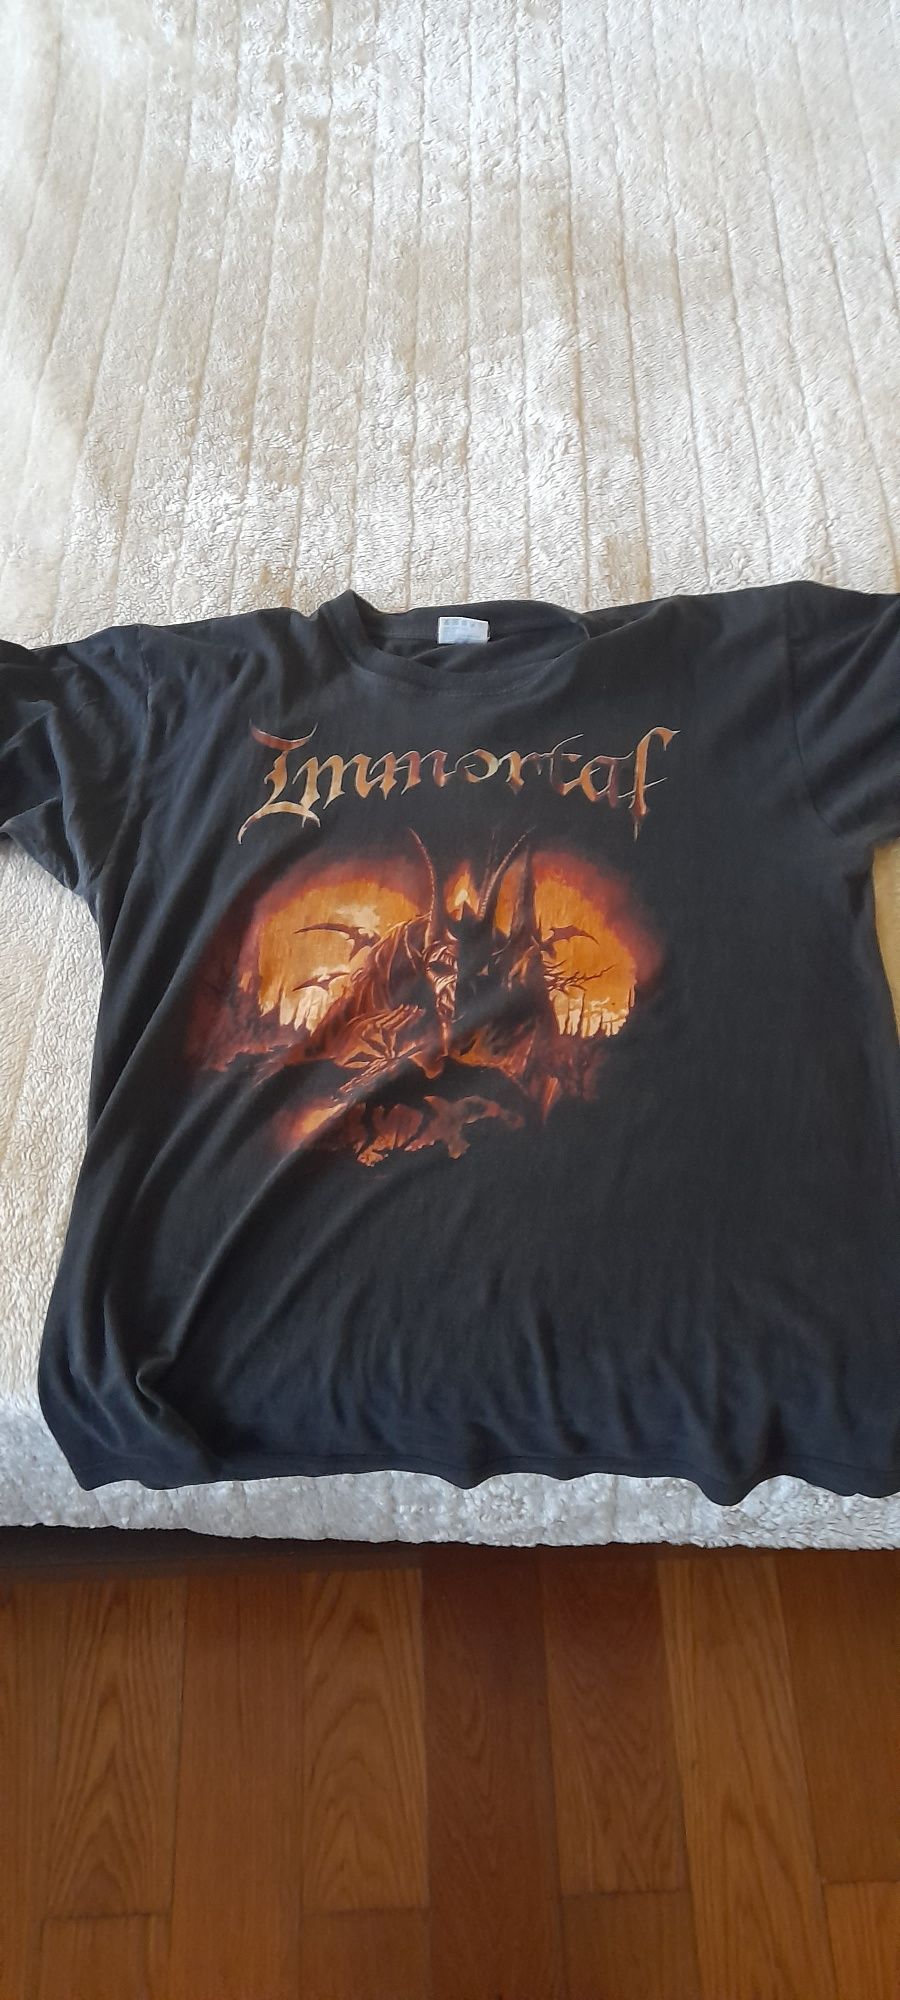 Immortal damned in black tour 2000 shirt